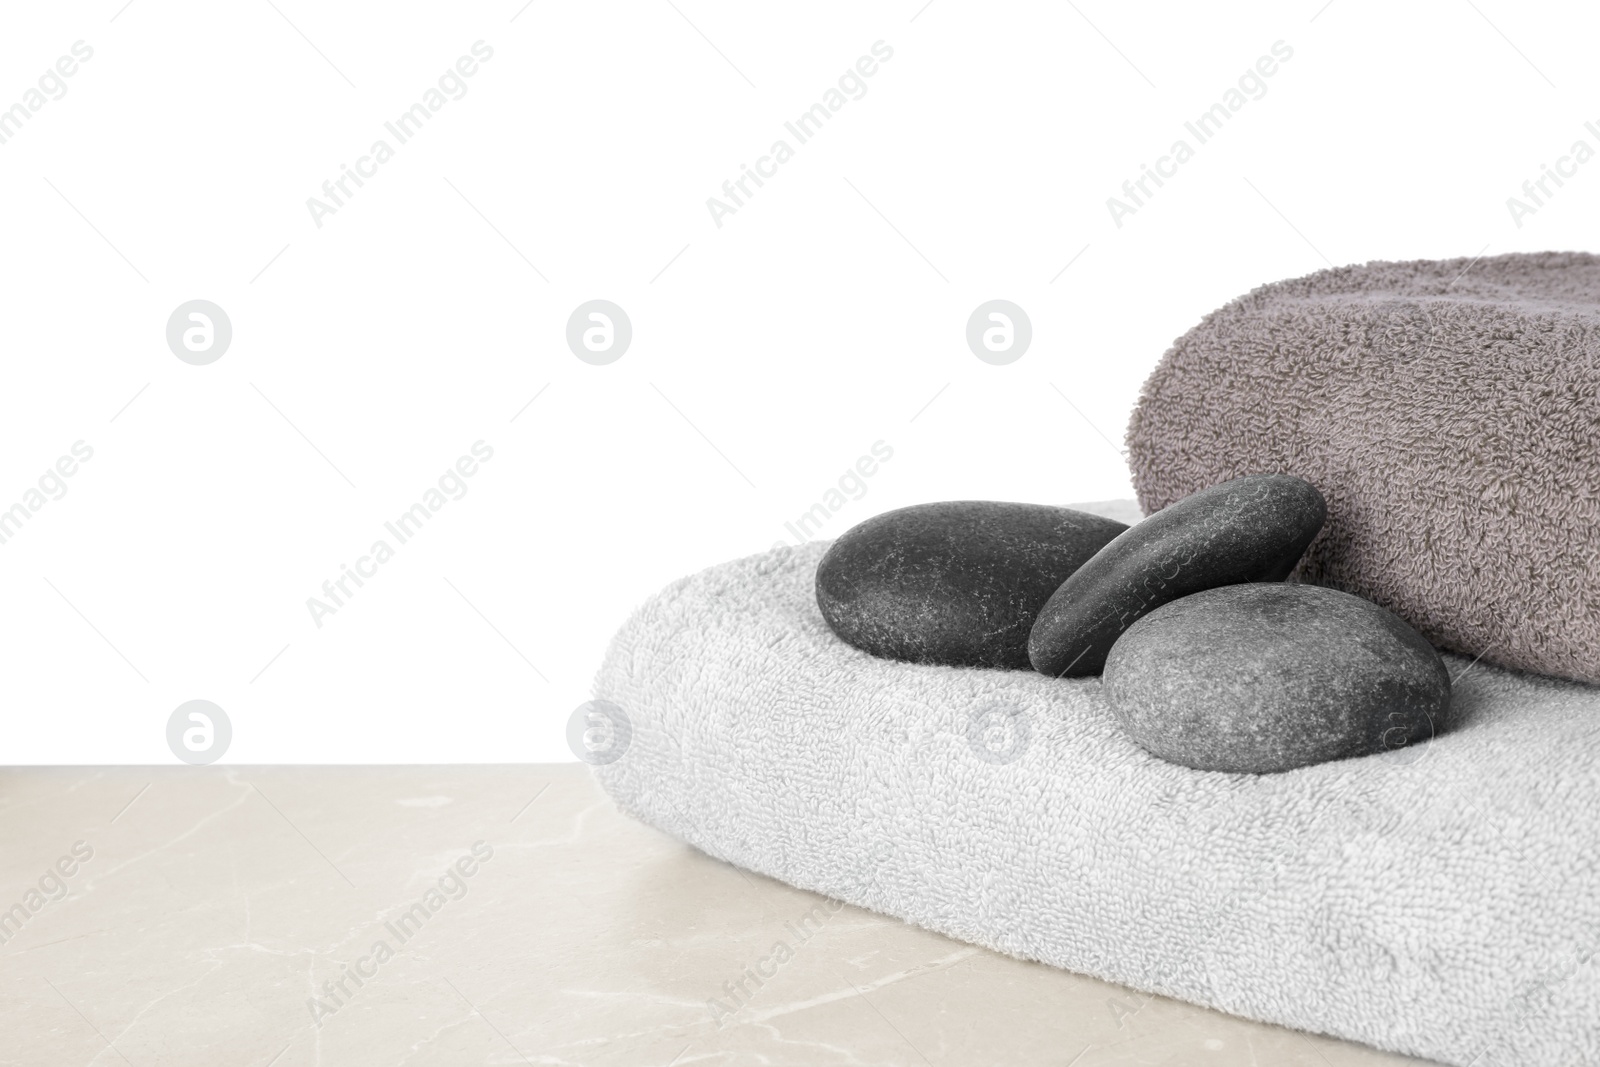 Photo of Towels and spa stones on table against white background